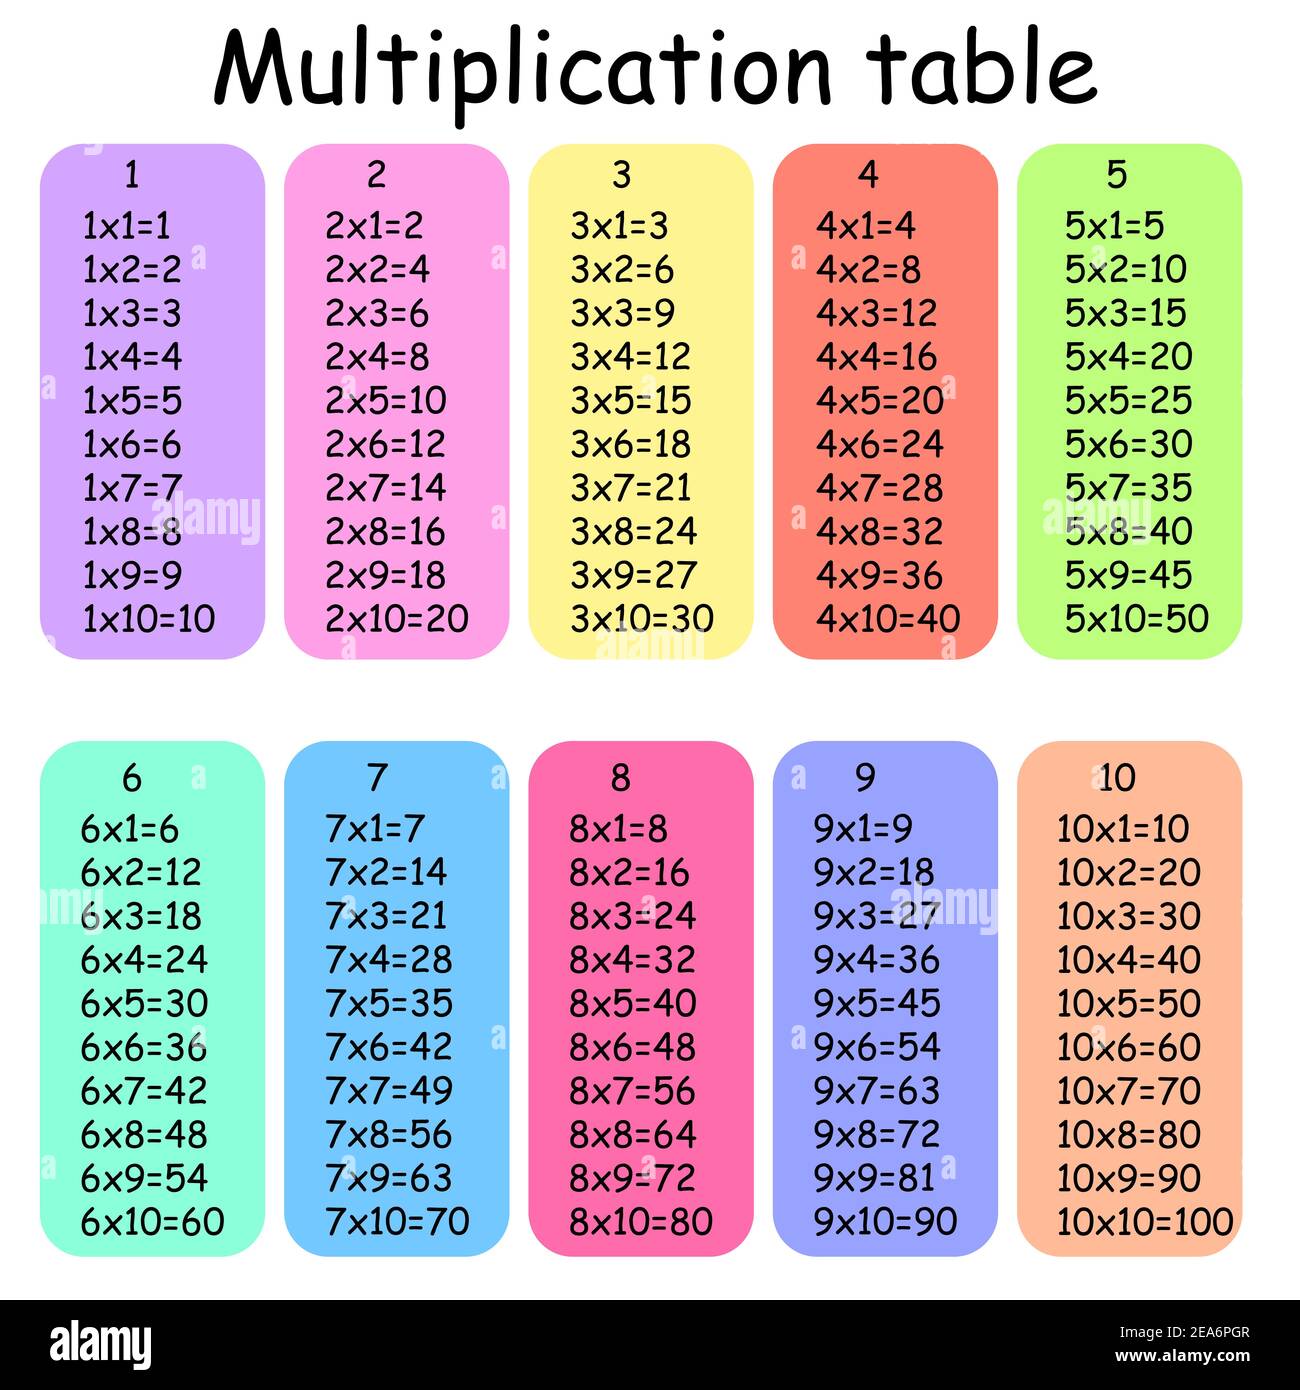 Multiplication Table Illustration High Resolution Stock Photography And